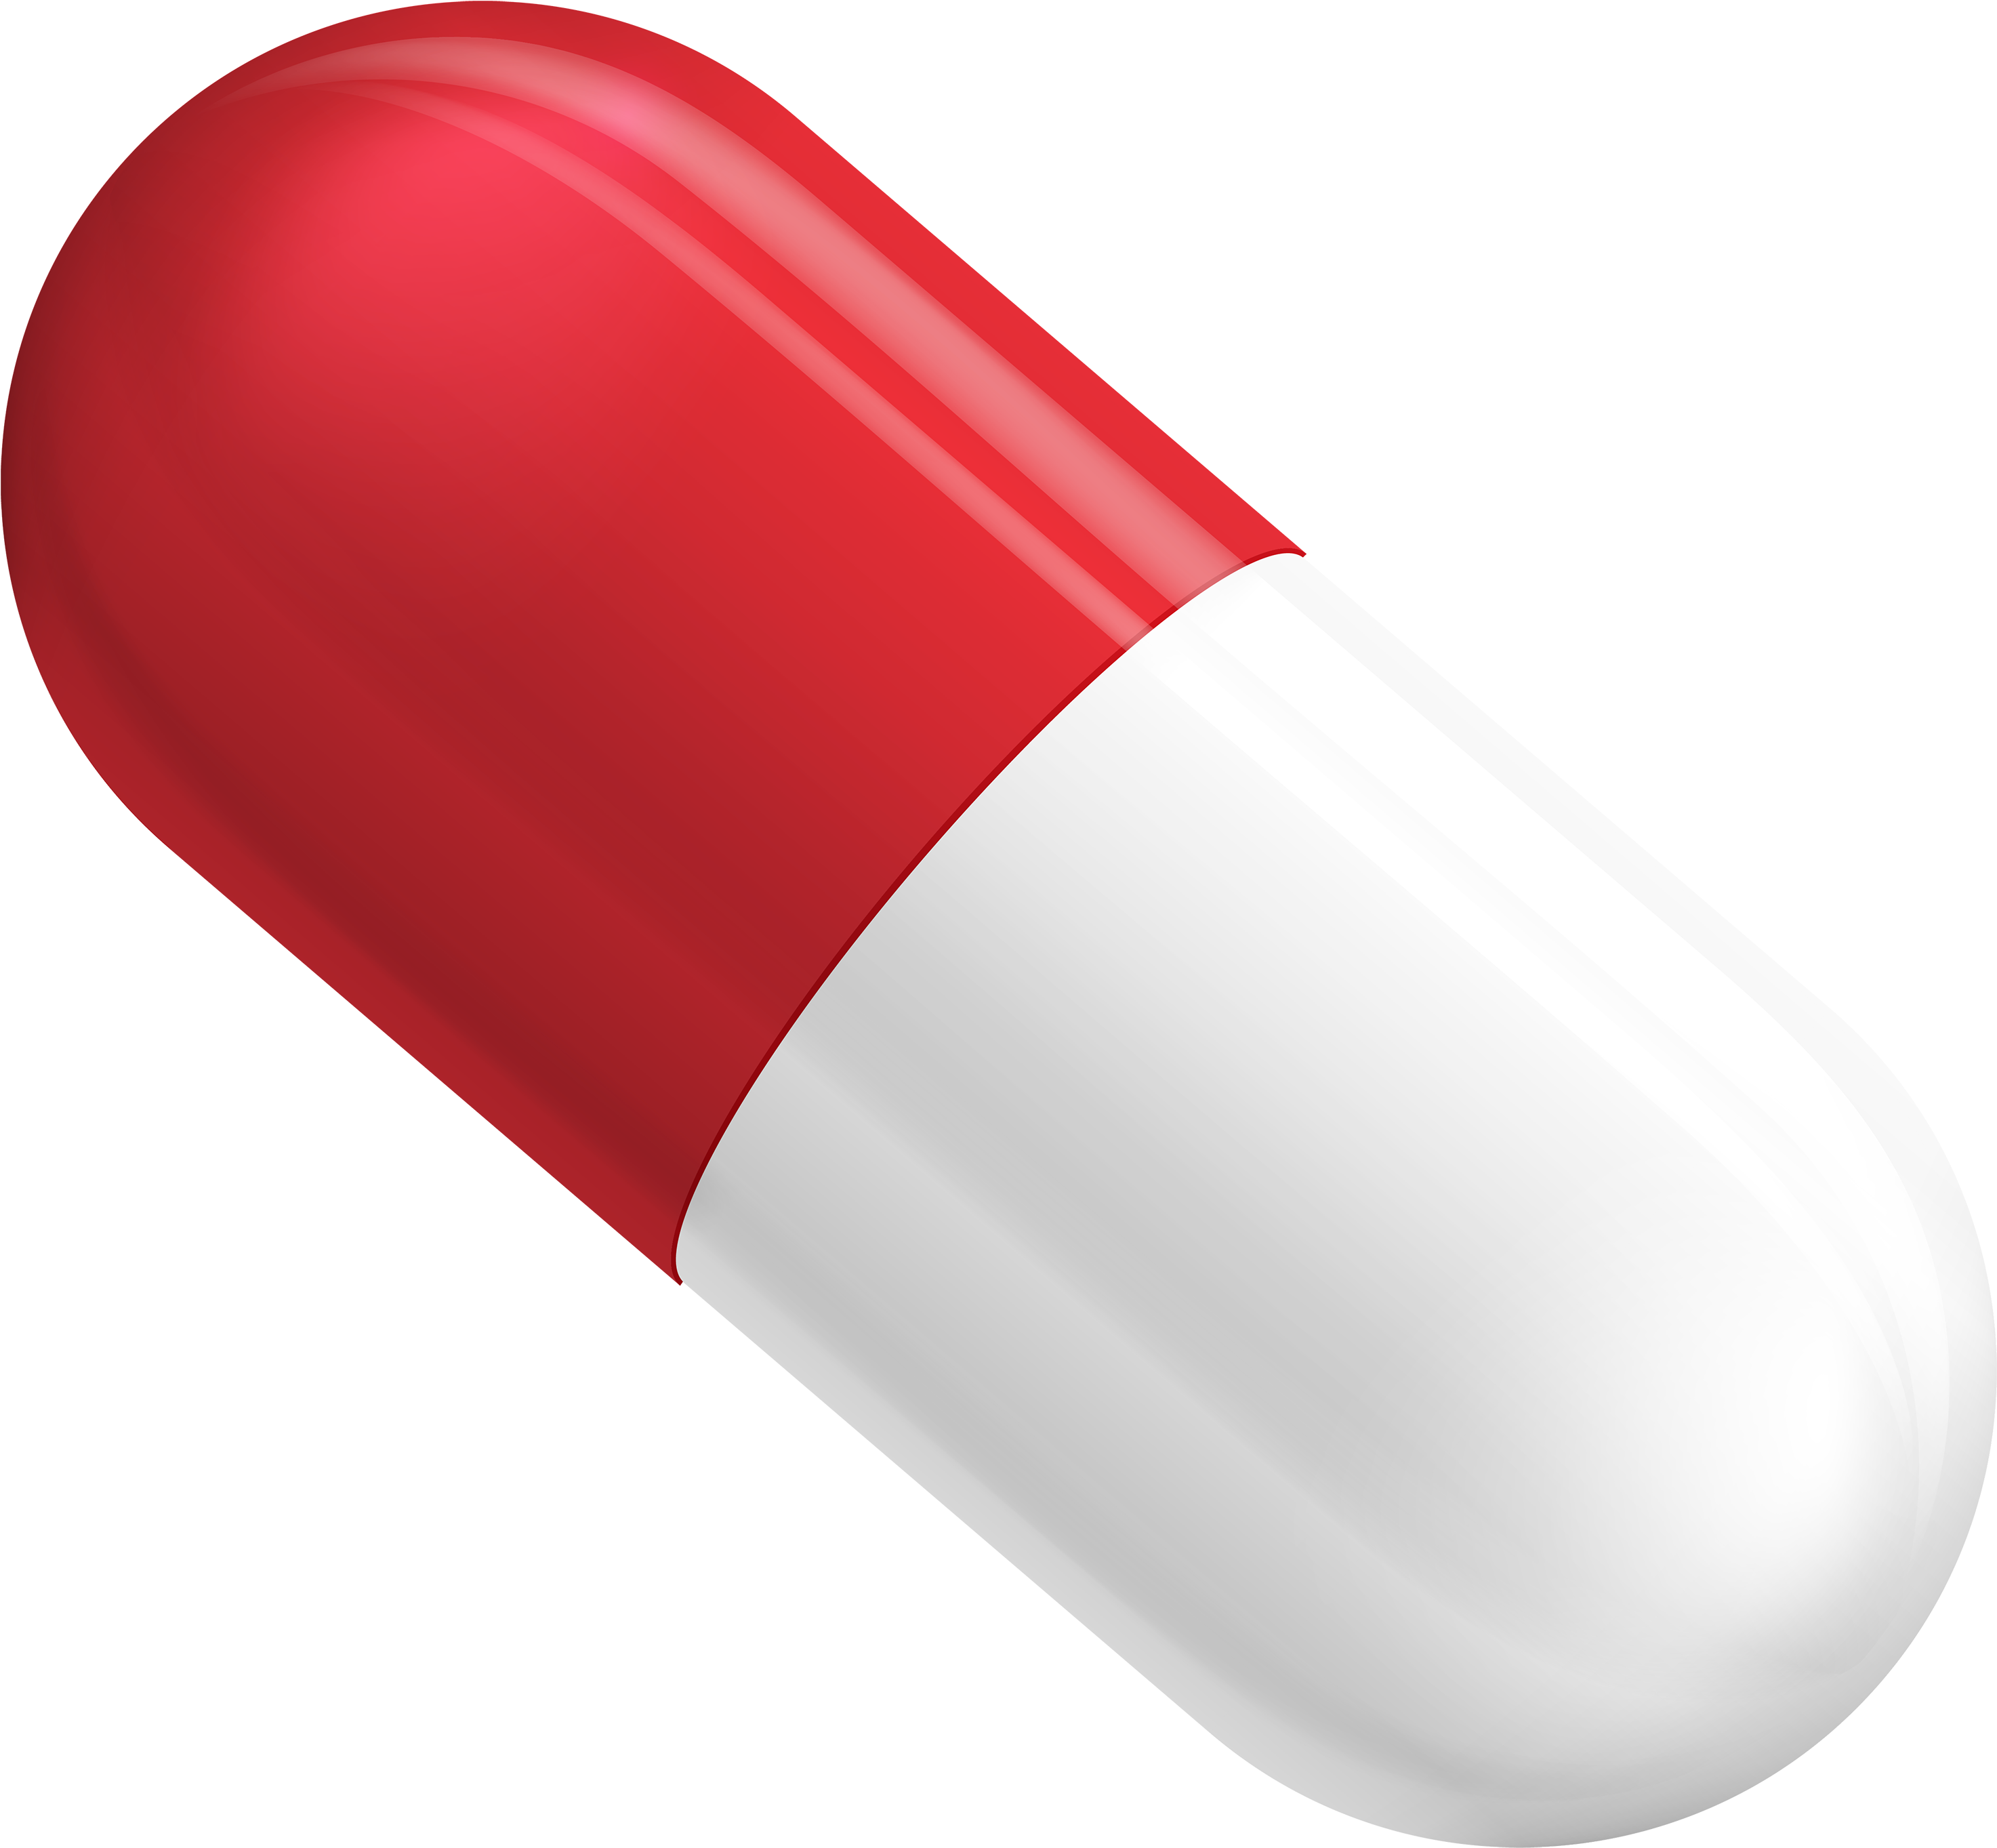 Free Pill Clipart Black And White, Download Free Pill Clipart Black And